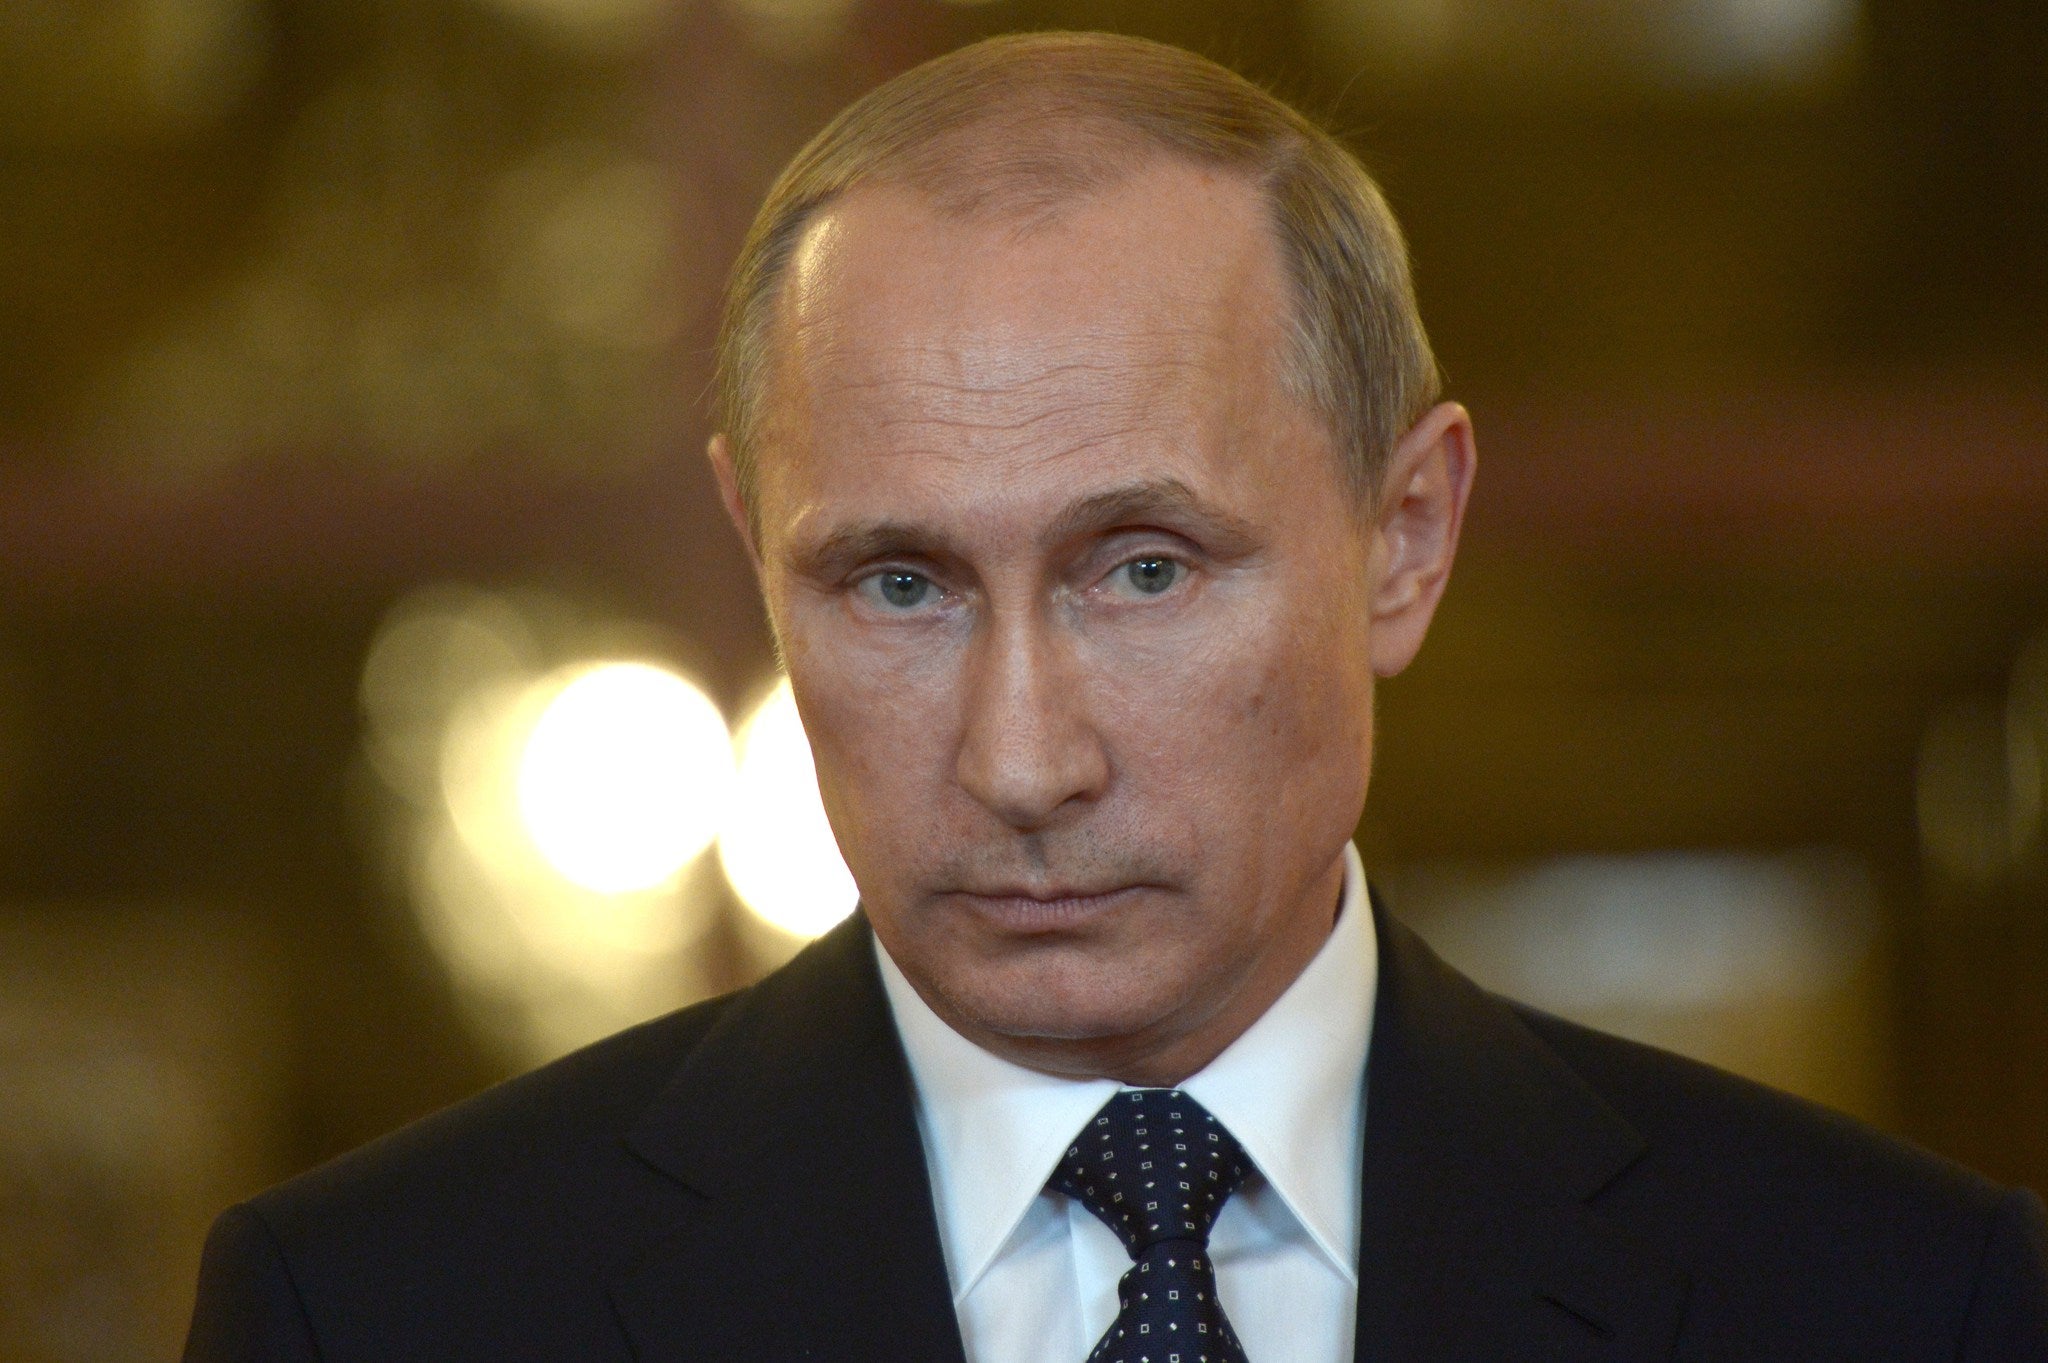 Russian President Putin has said that MH17 should not be used for "mercenary objectives"